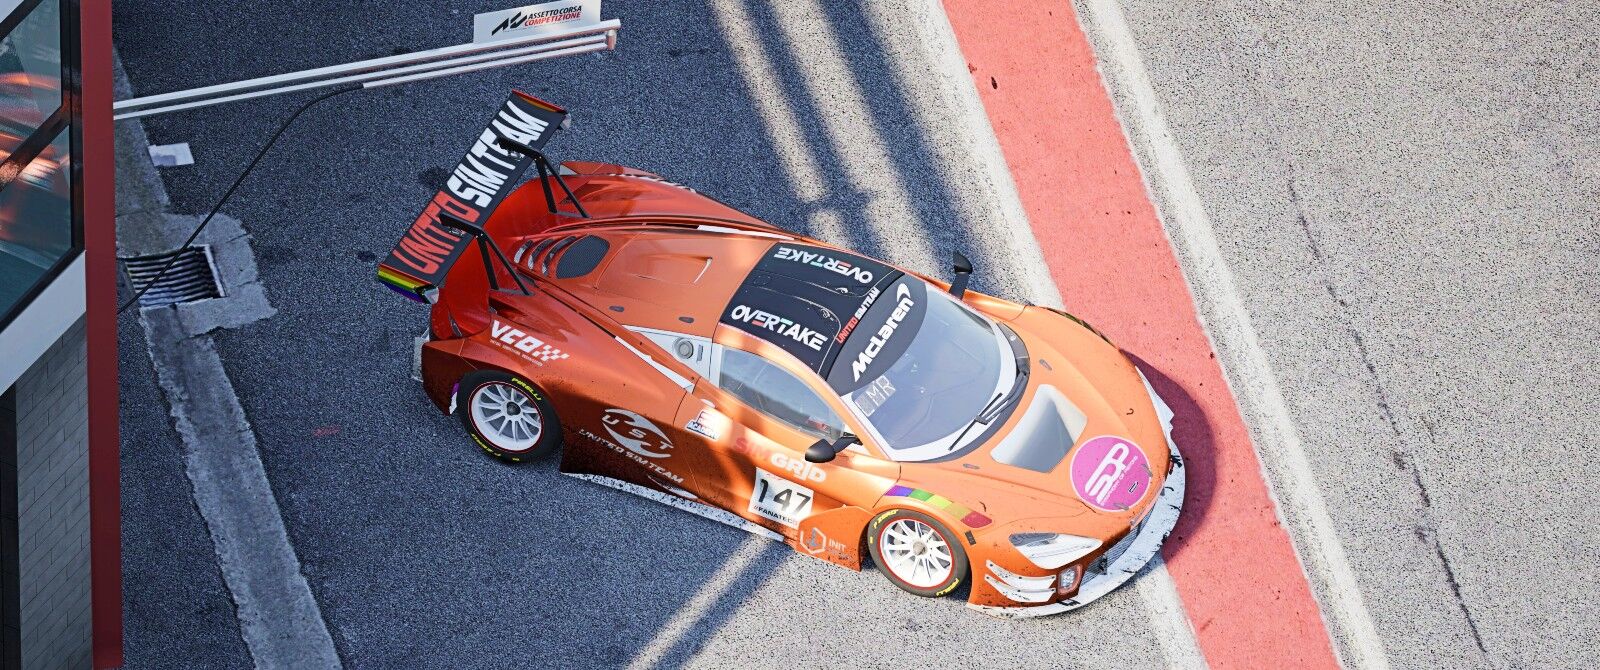 A metallic orange and chrome red McLaren racing car in a pit stall.